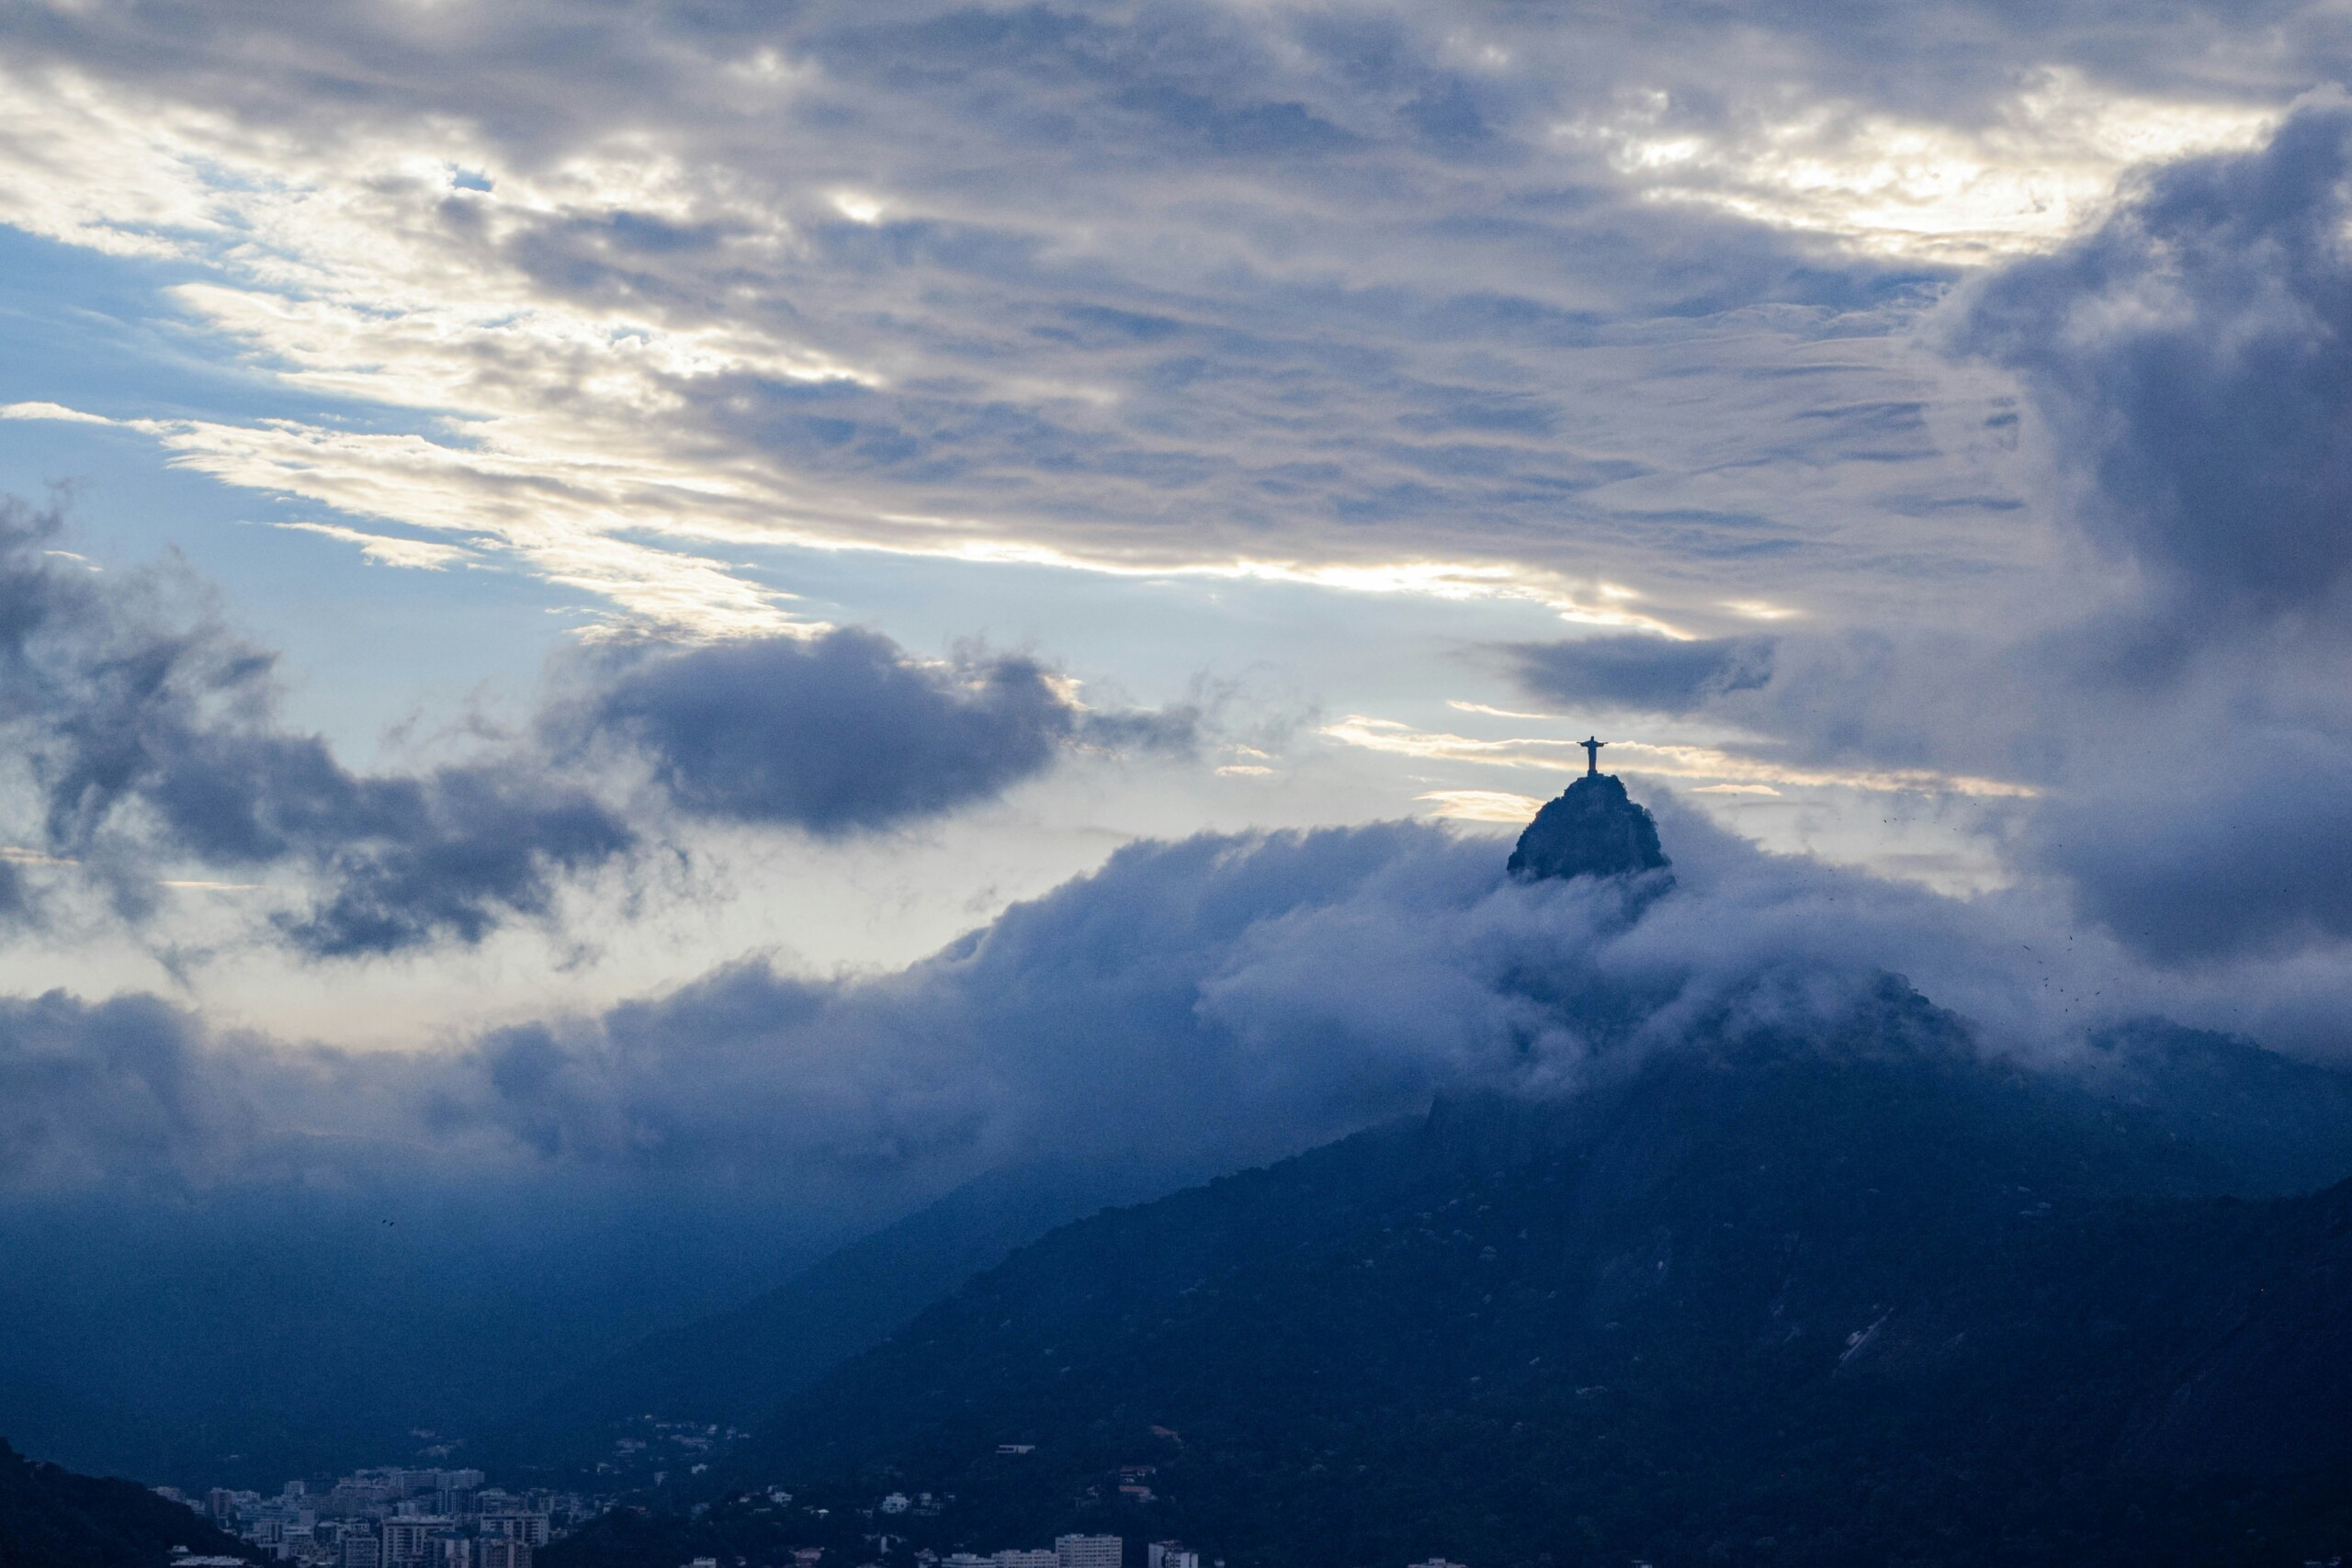 A picture of the Christ the Redeemer statue in Rio de Janeiro from afar with beautiful clouds moving all around it, the blue sky and sunlight peaking out.